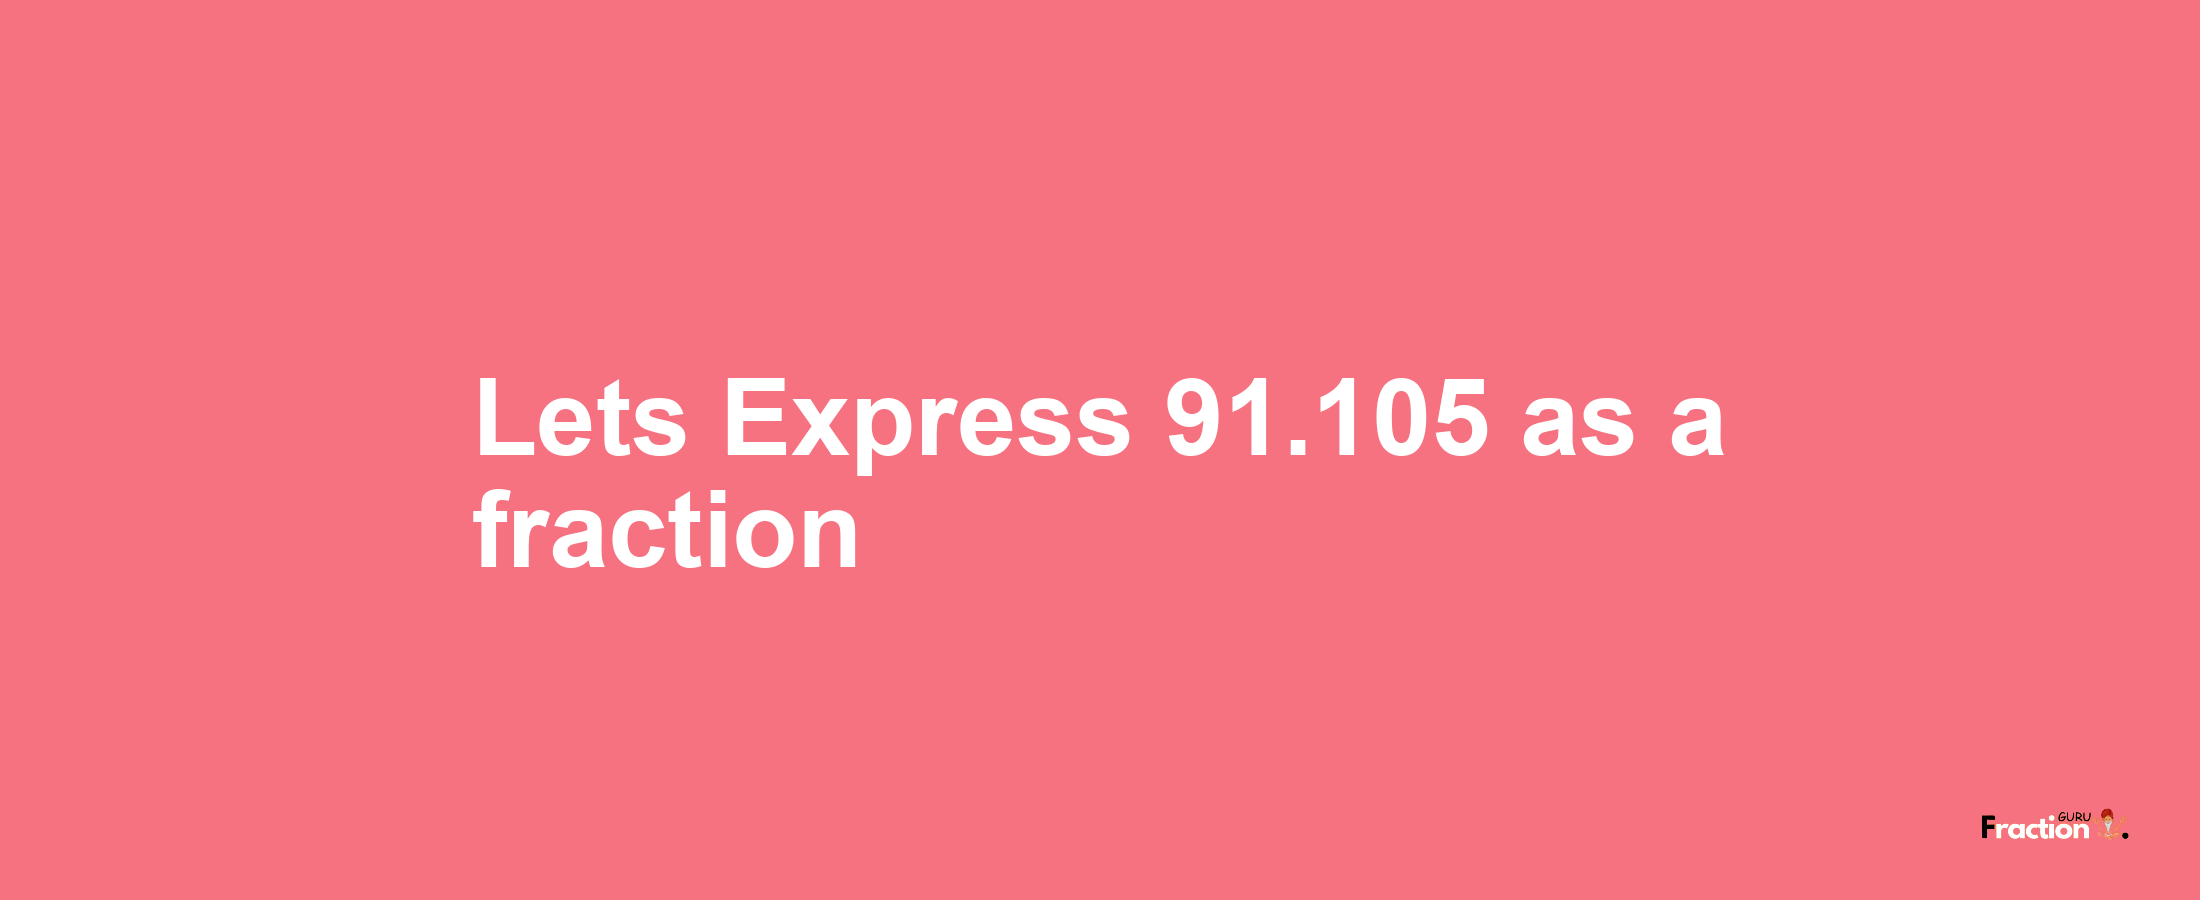 Lets Express 91.105 as afraction